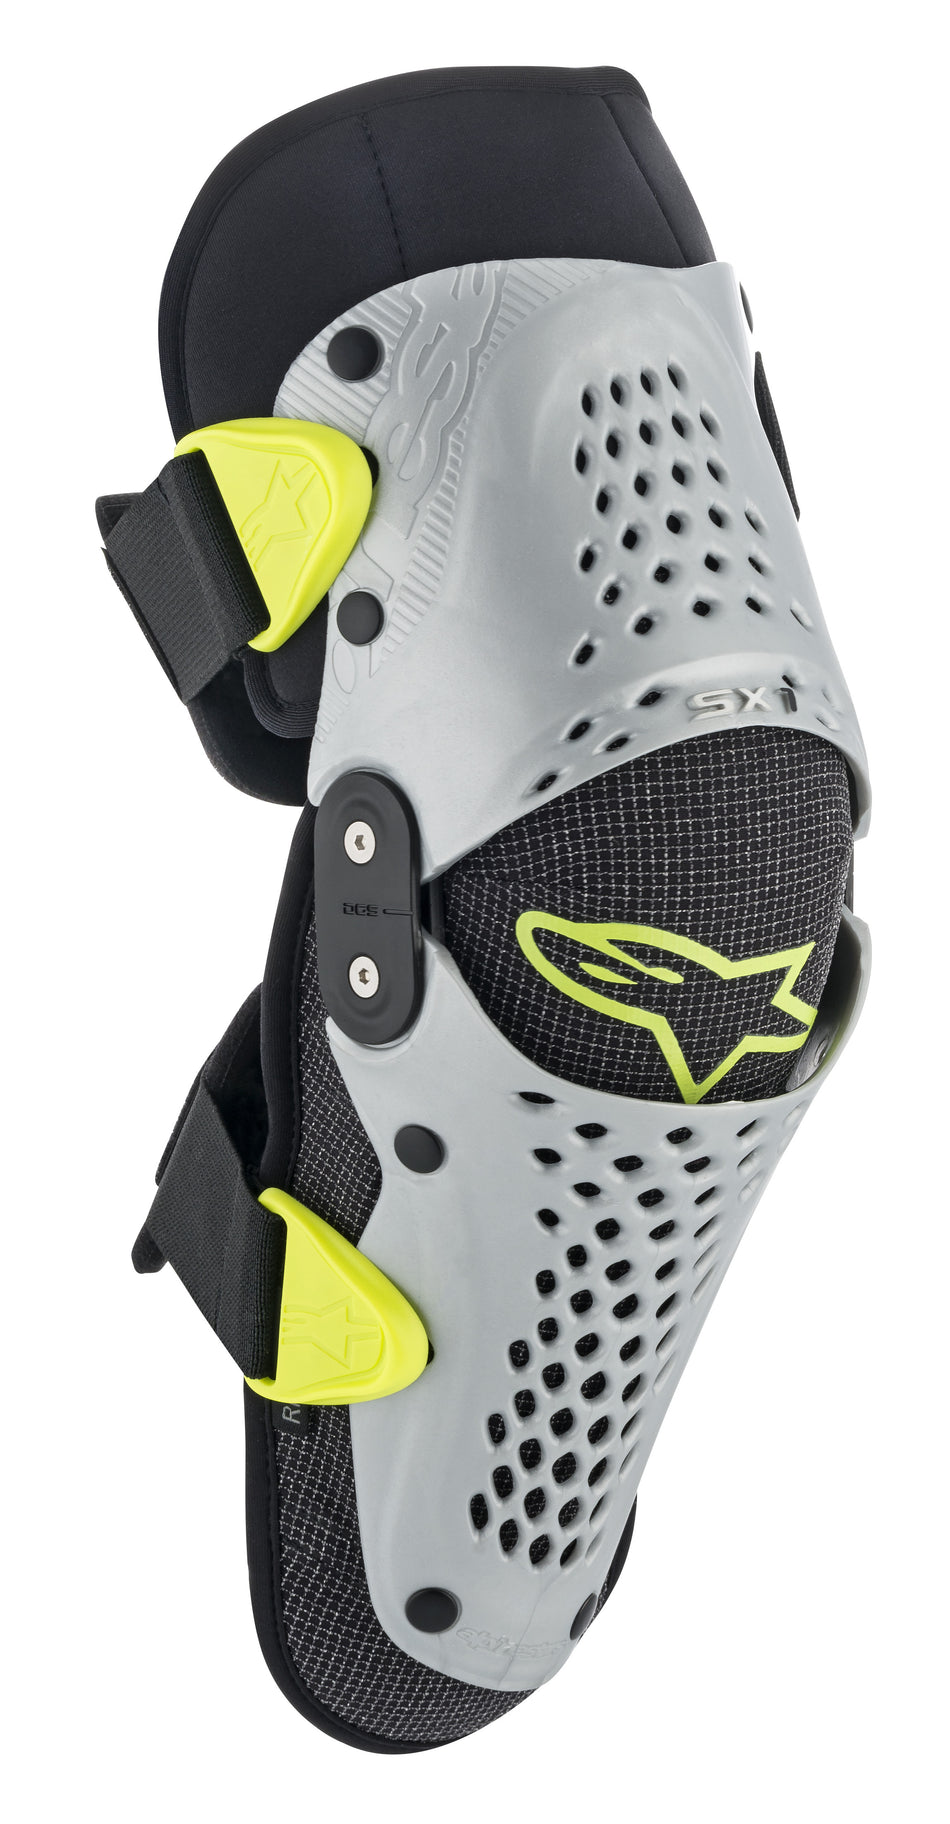 ALPINESTARS Youth Sx-1 Knee Guards Silver/Yellow Sm/Md 6546319-195-S/M